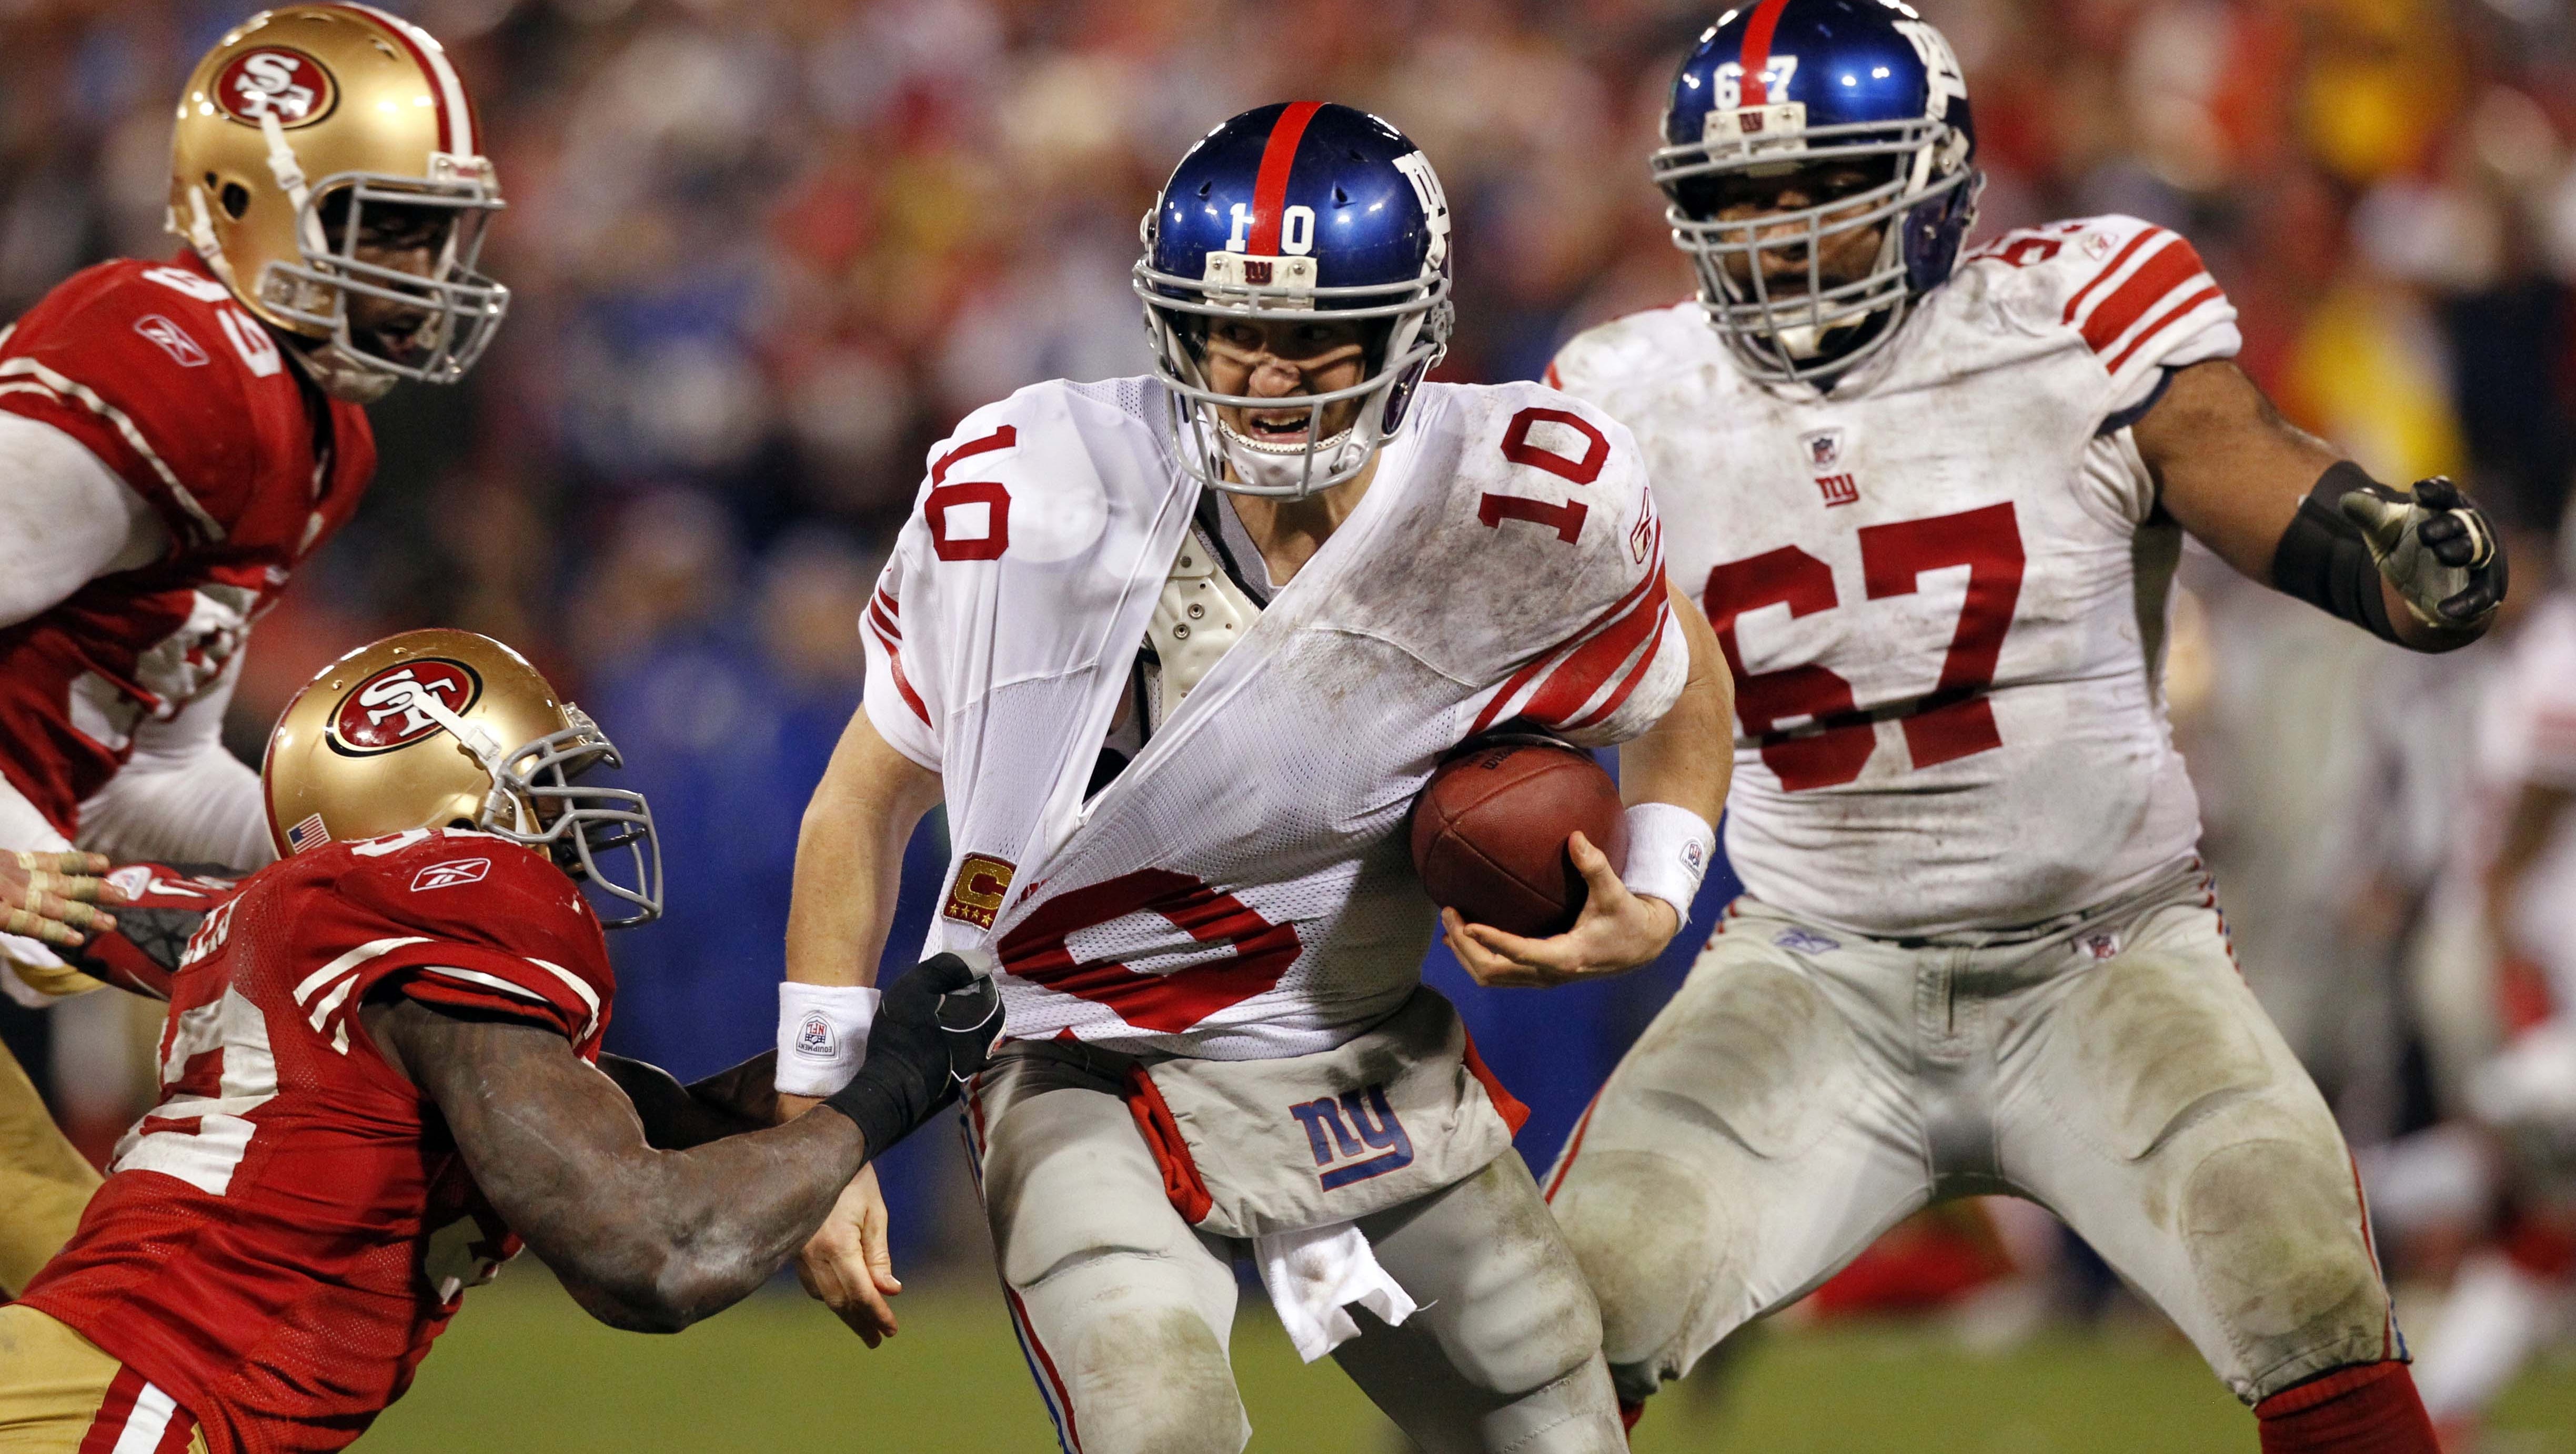 Image result for giants 49ers 2011 nfc championship